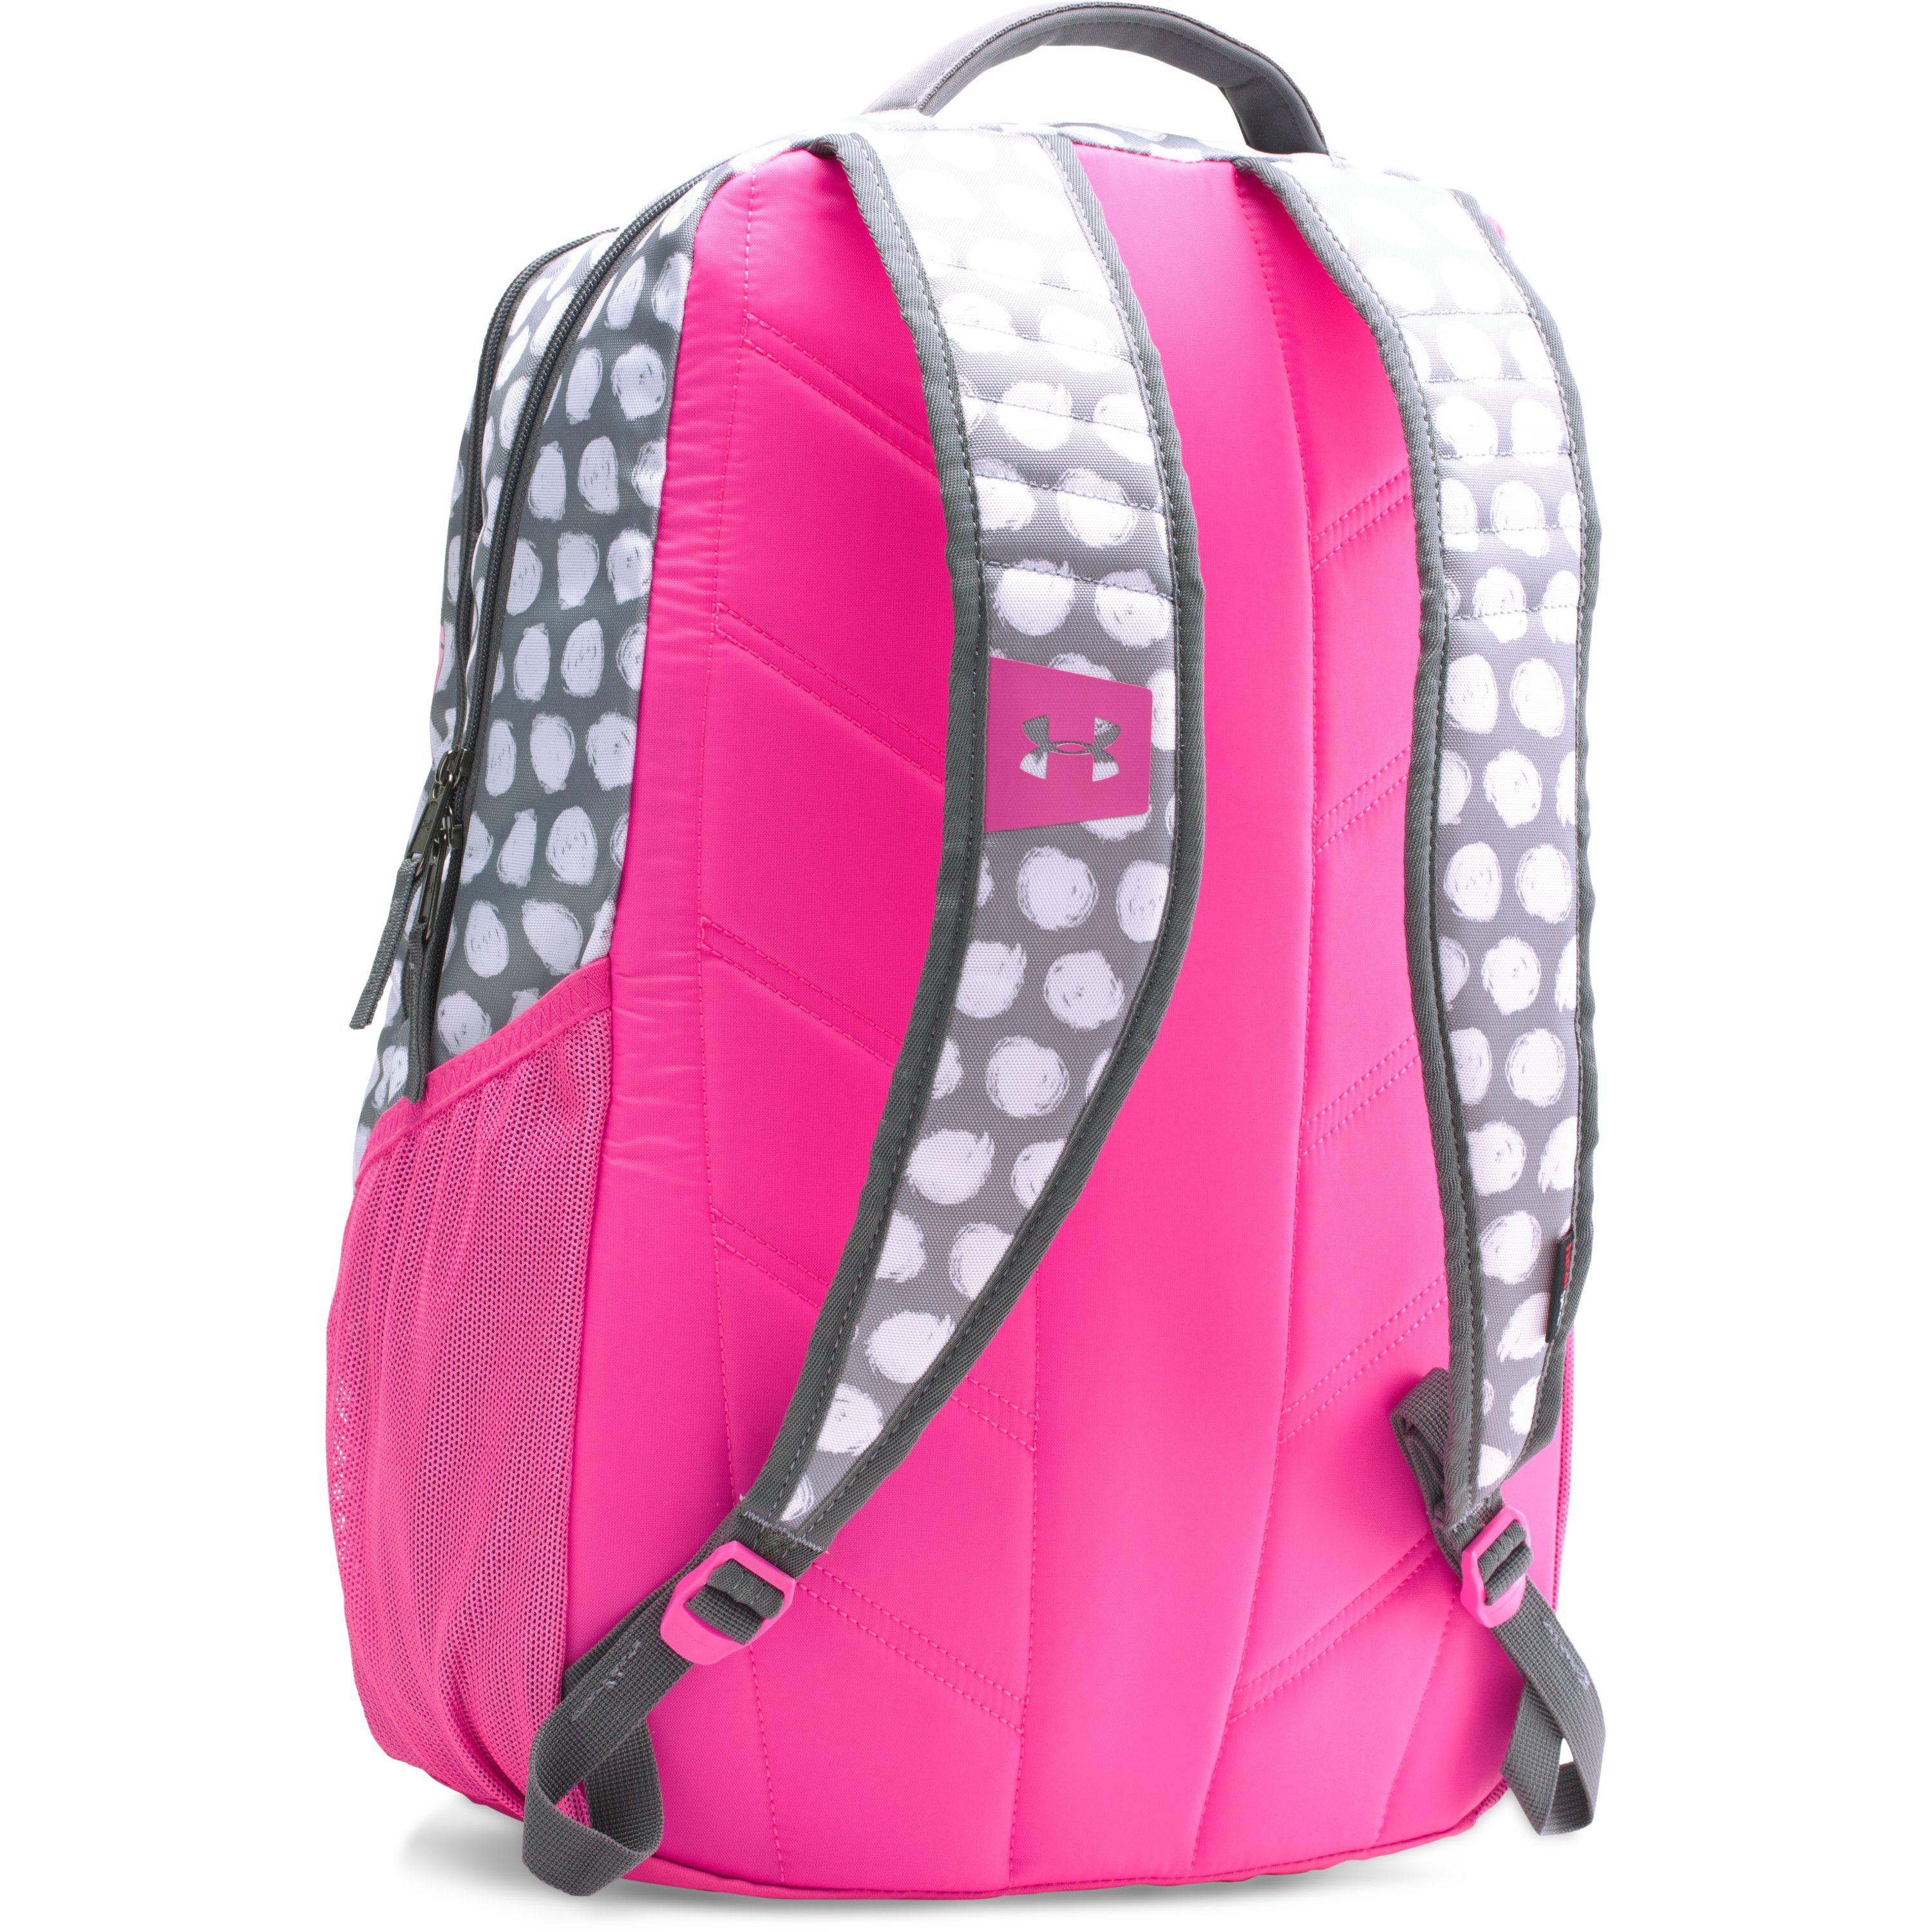 Under Armour, Bags, Pink Under Armour Backpack